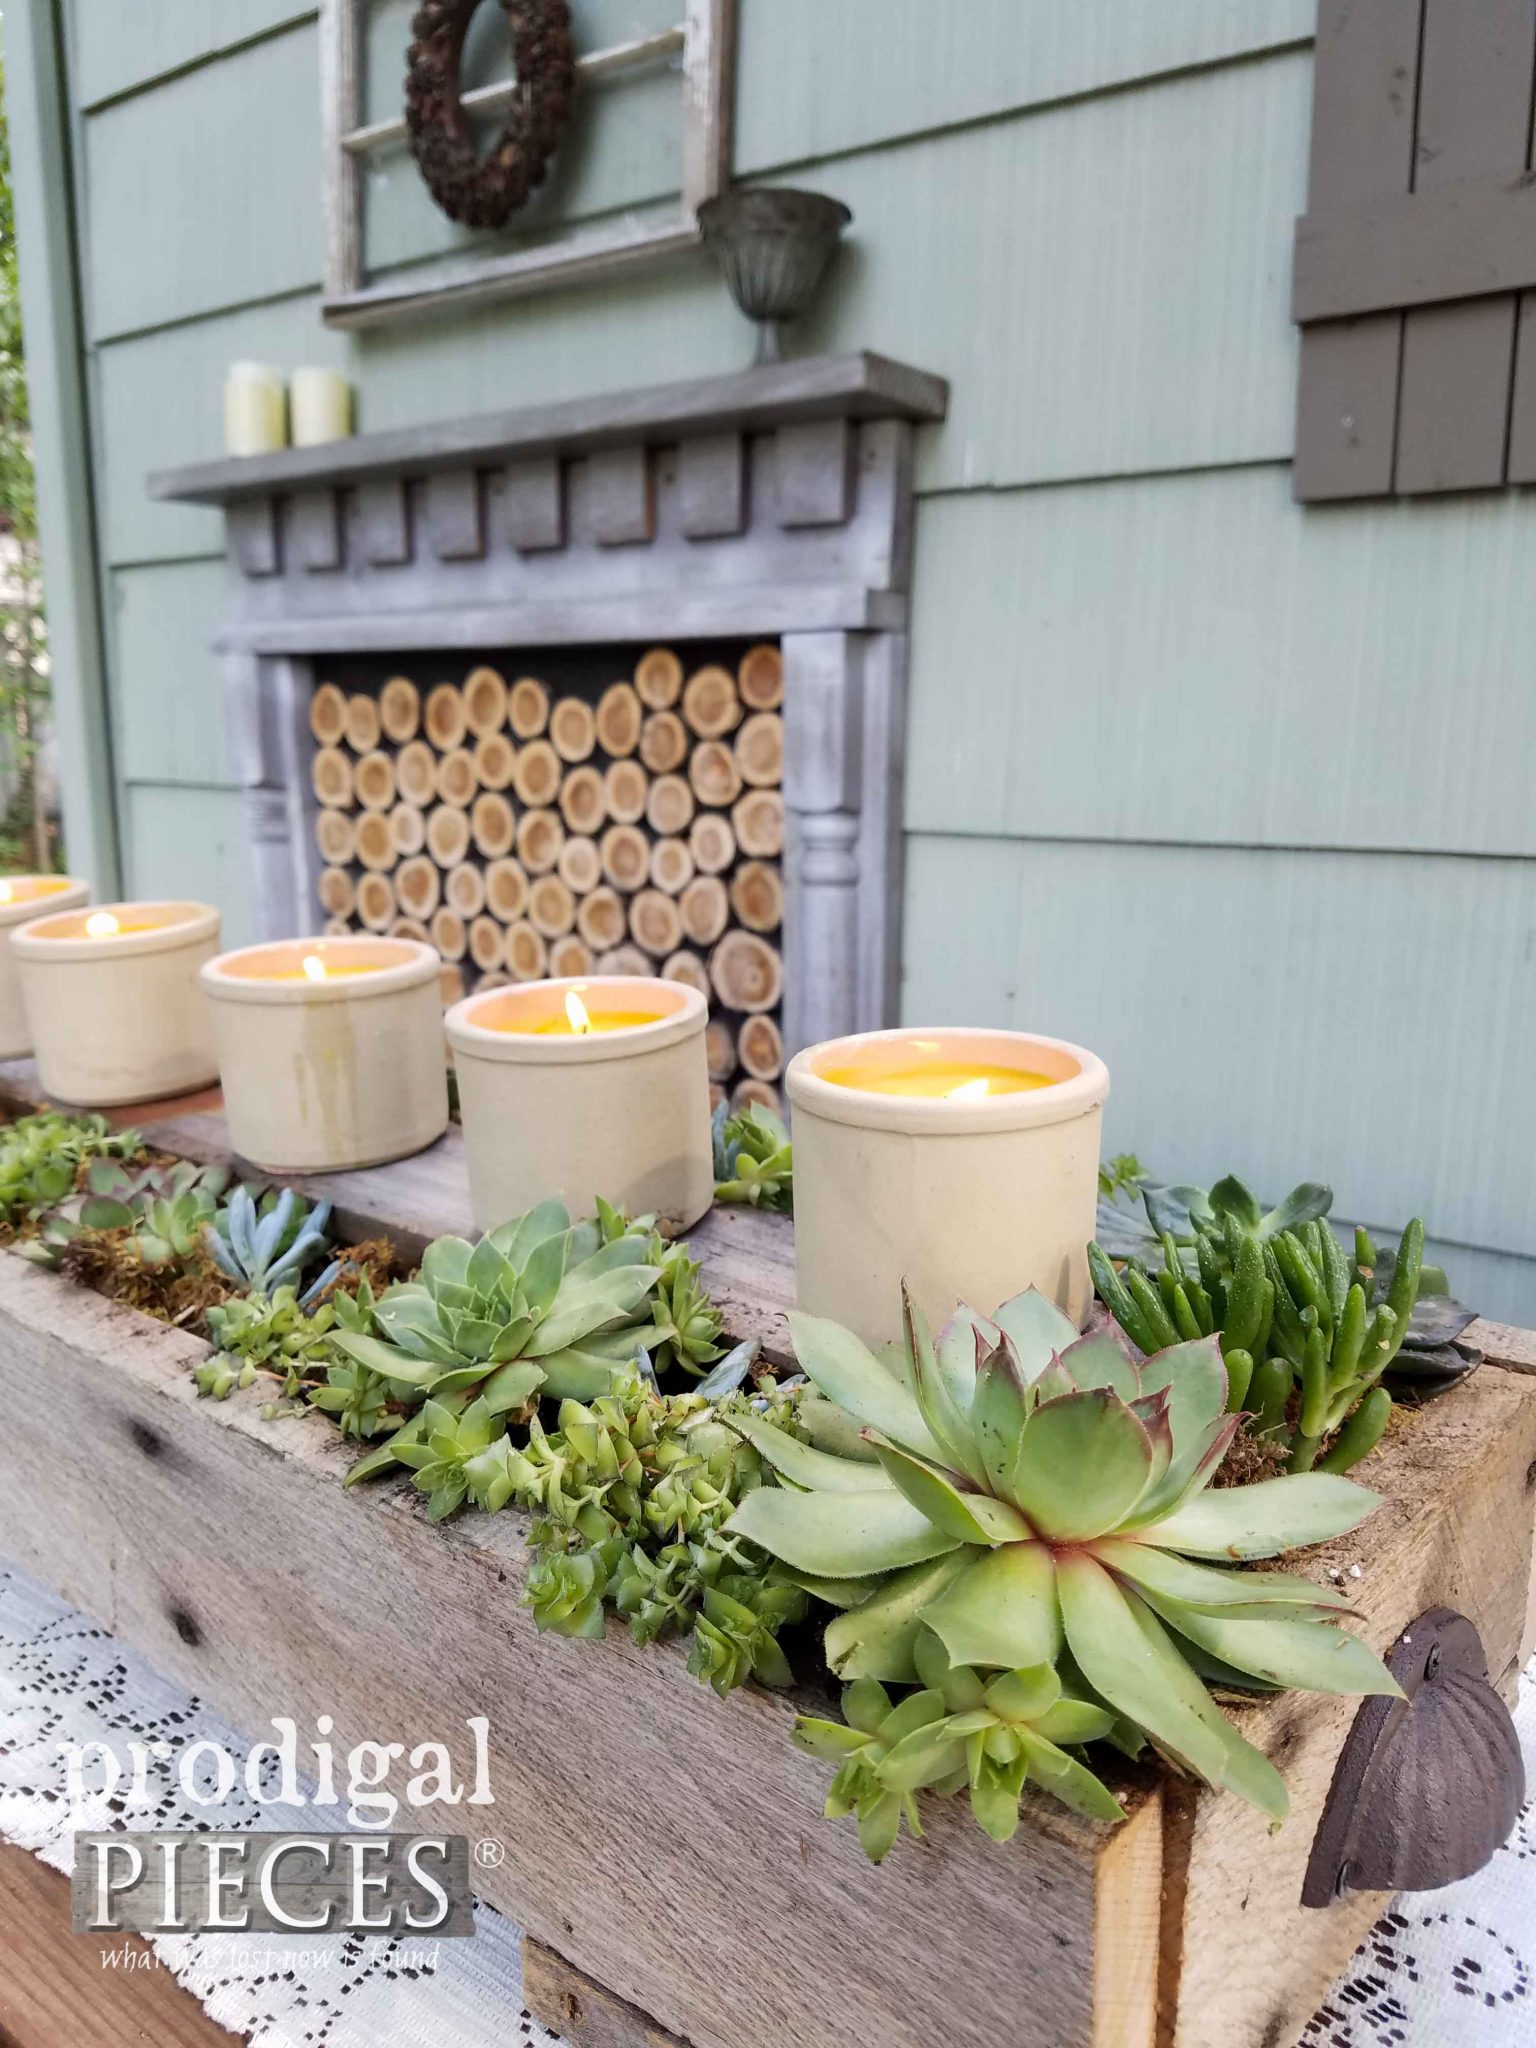 Rustic Succulent Planter for Your Indoor or Outdoor Decor by Prodigal Pieces | prodigalpieces.com